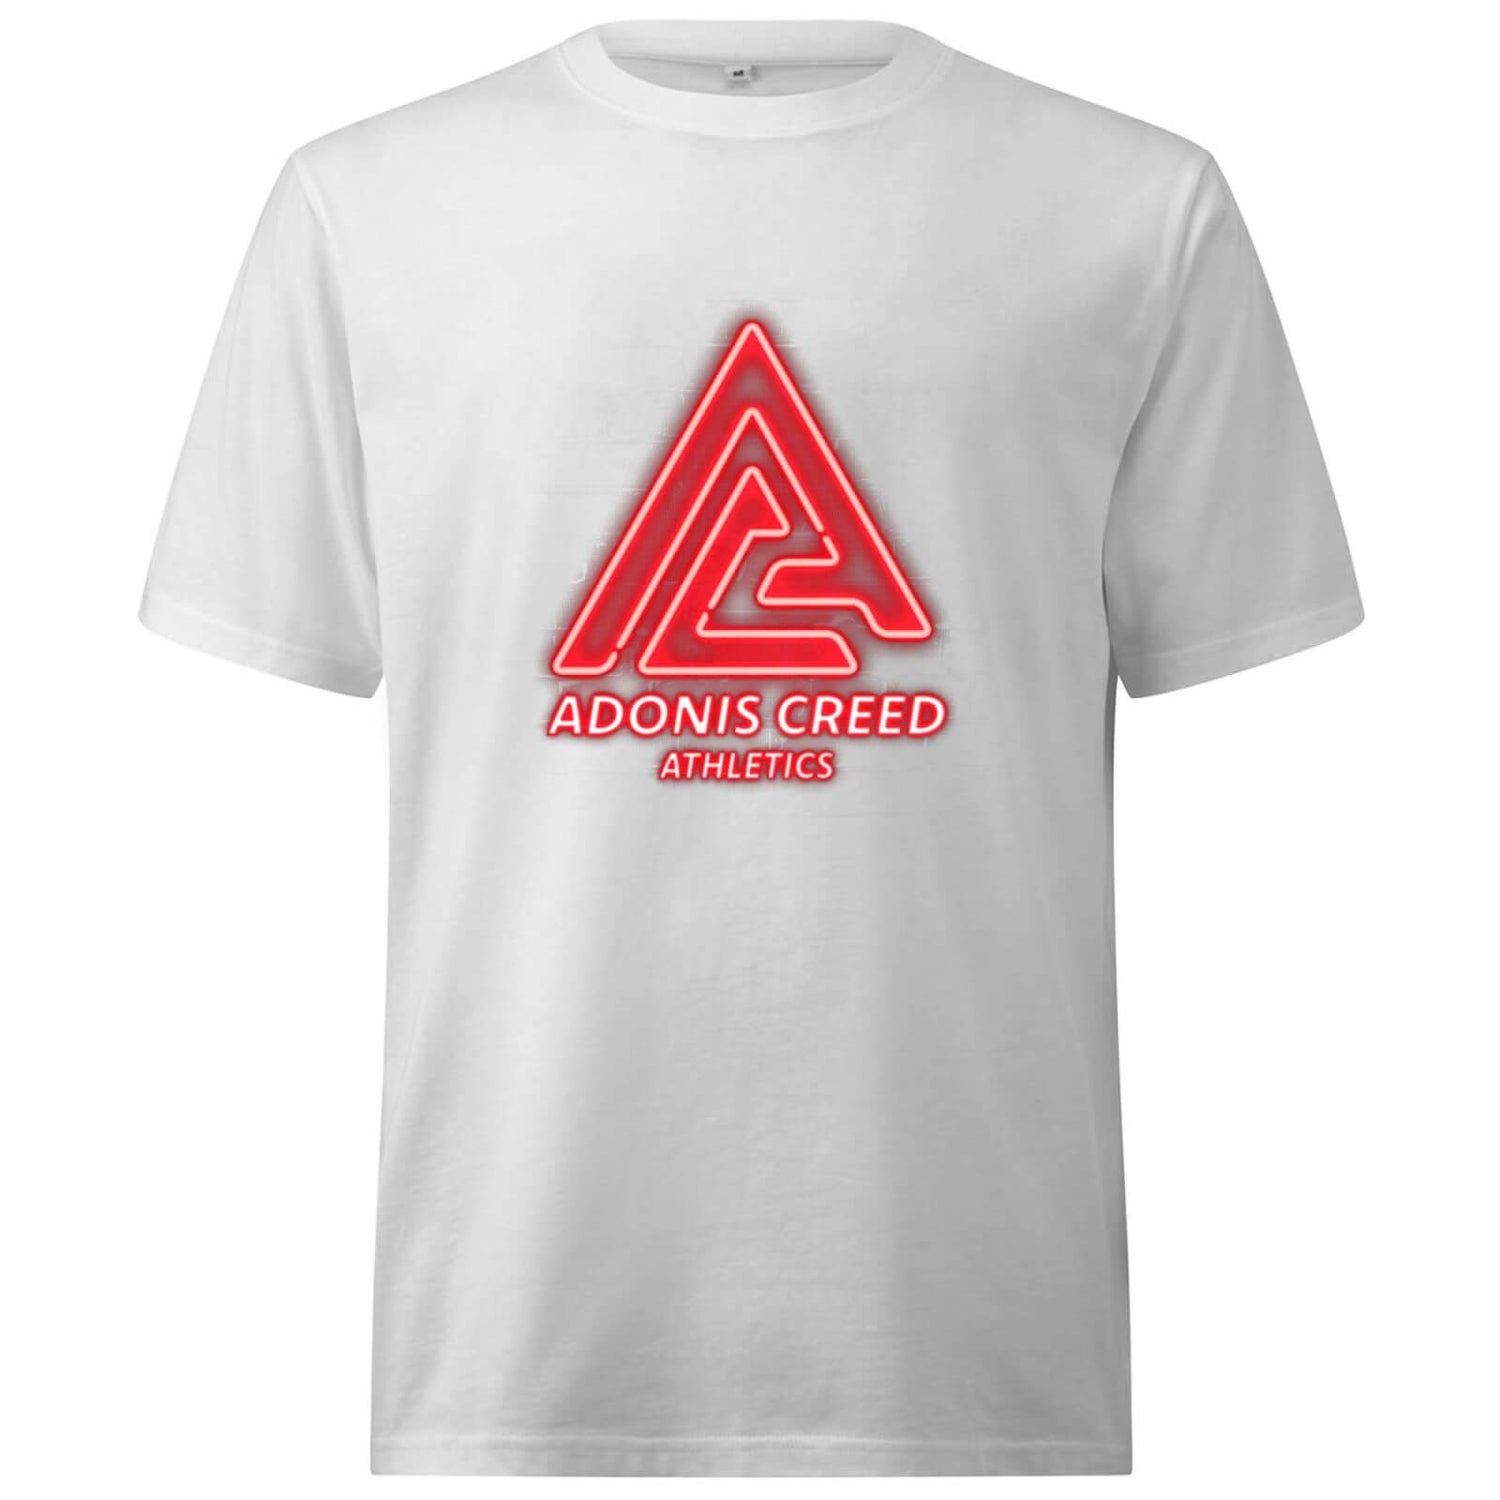 Creed Adonis Creed Athletics Neon Sign Oversized Heavyweight T-Shirt - White - XS